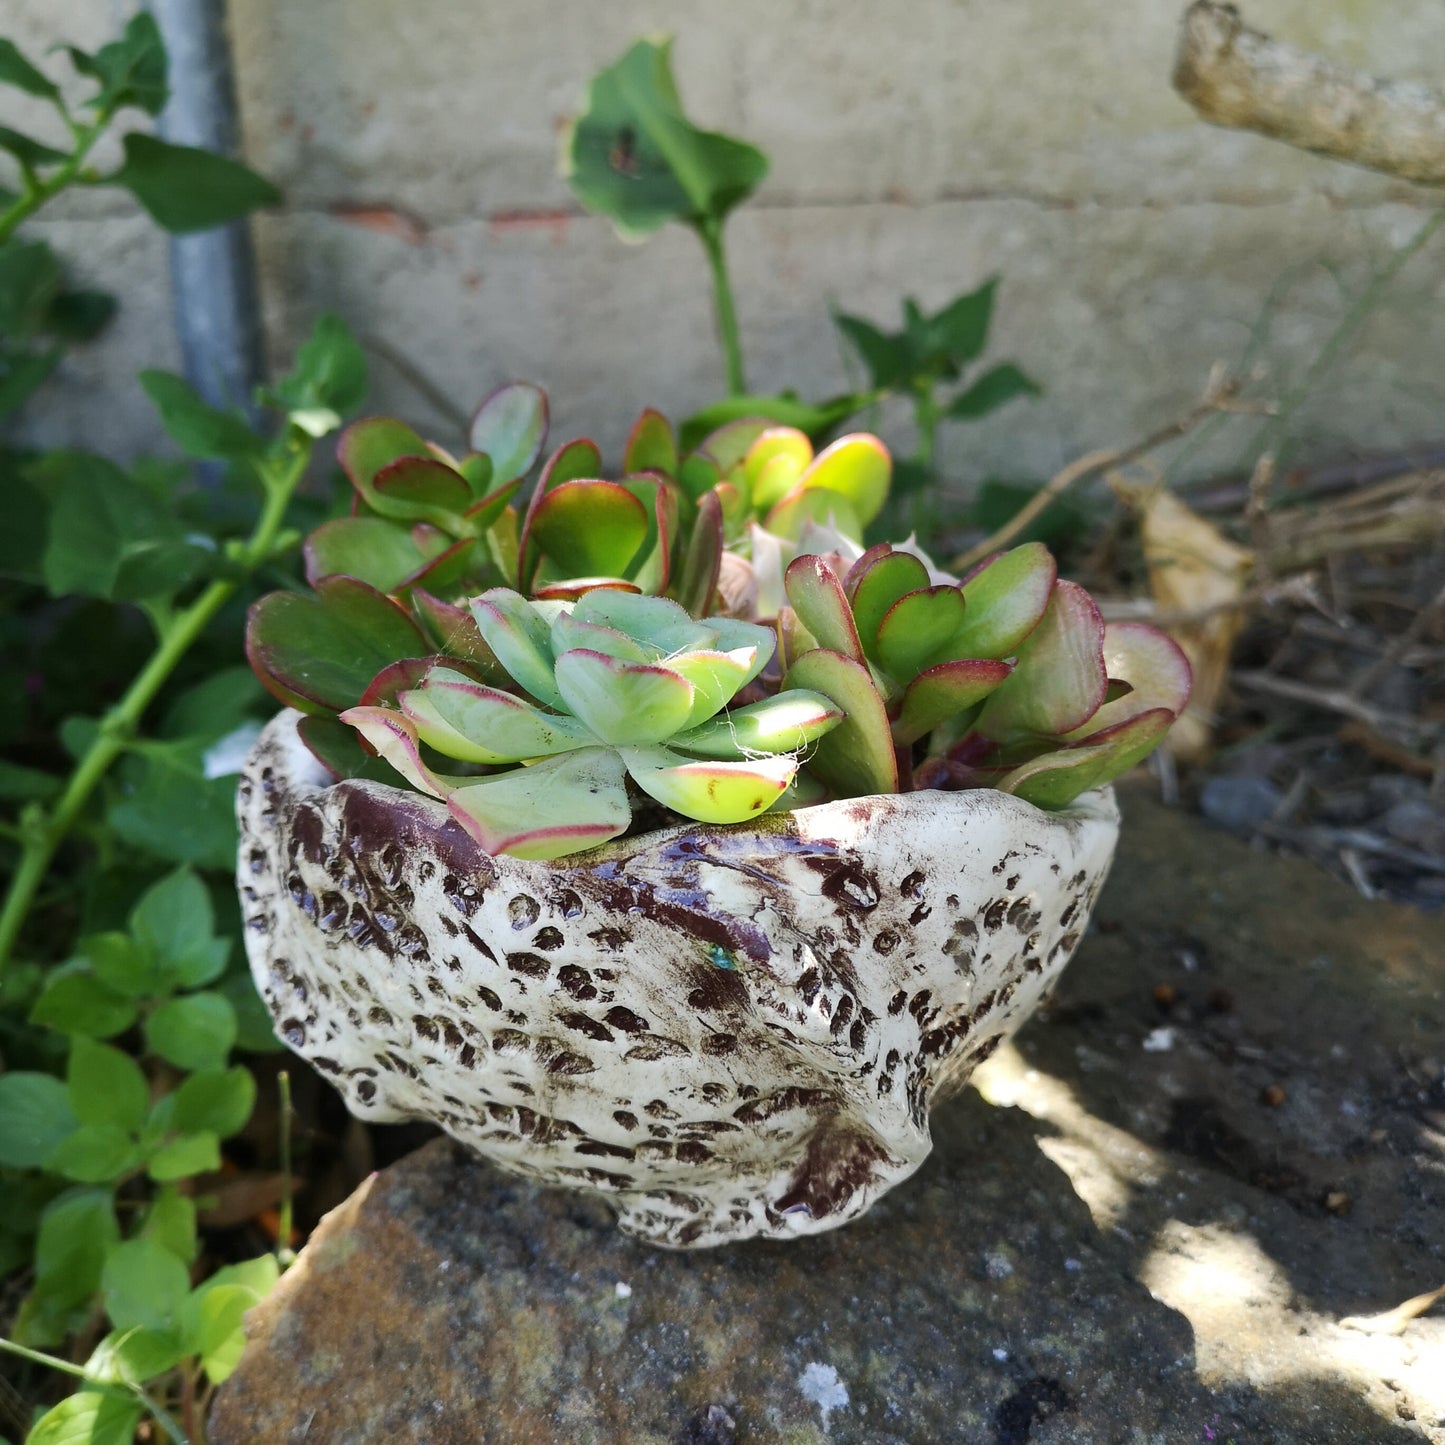 Handmade Ceramic Bowl With Organic Shape, Textured Succulent Planter Without Holes For Home Decor, Gift Idea for Women Who Have Everything - Ceramica Ana Rafael